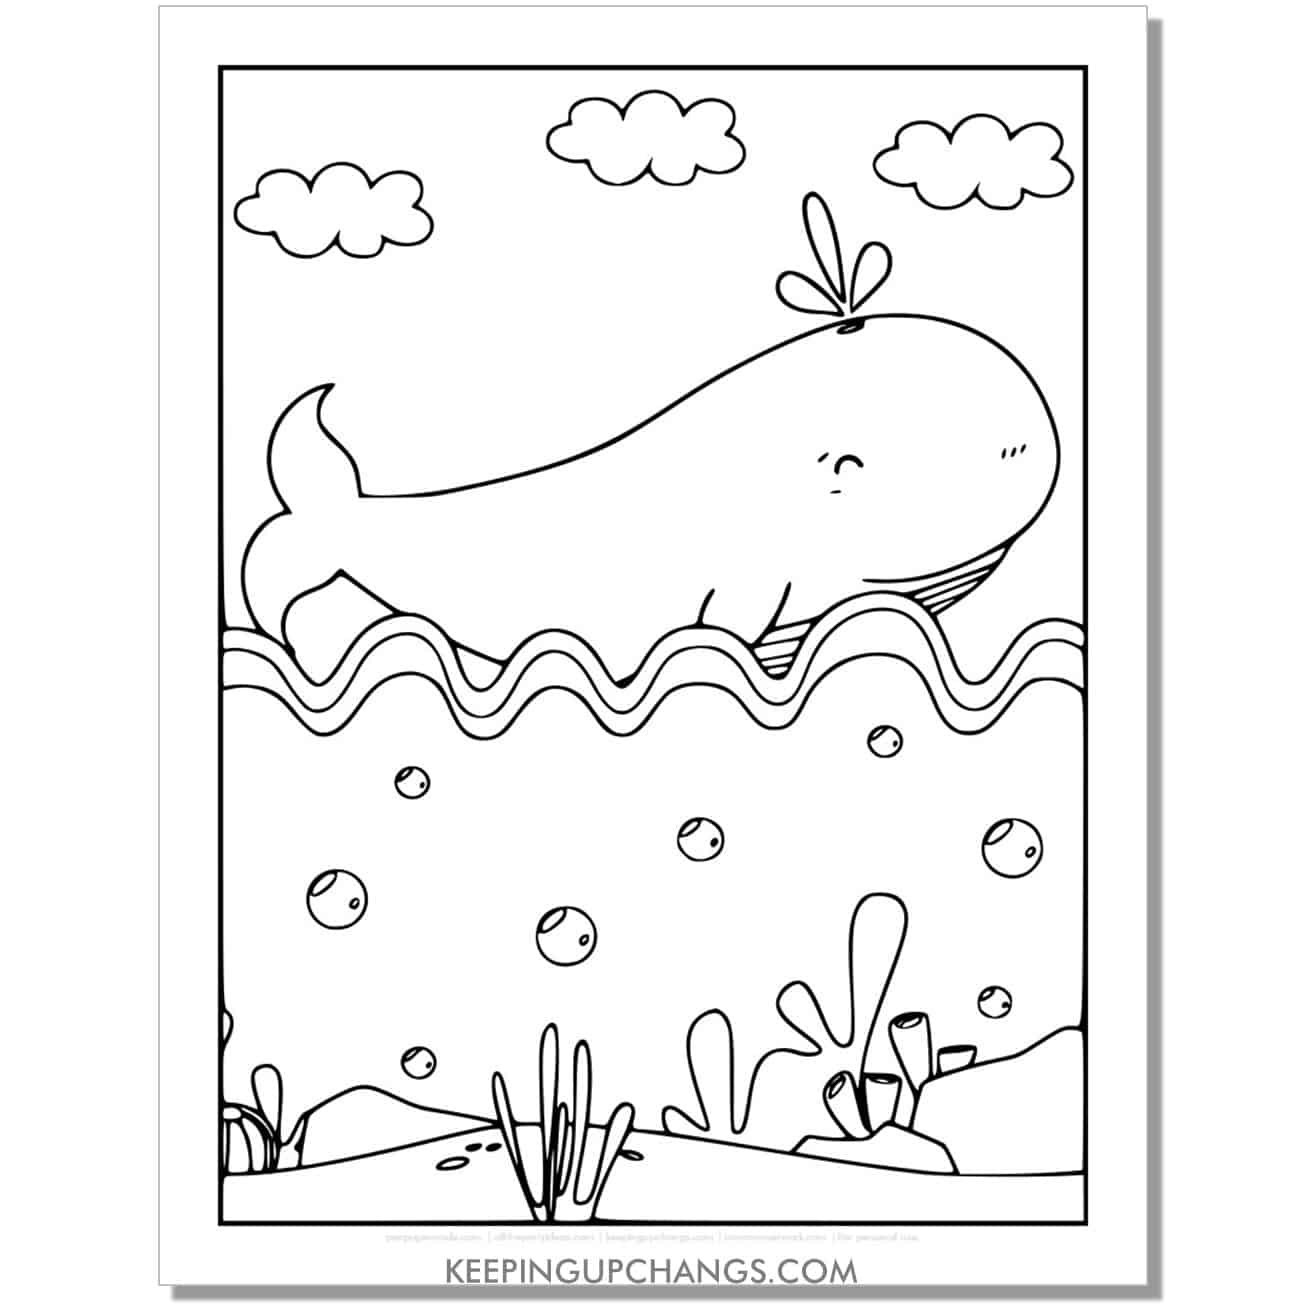 free happy full size whale coloring page, sheet for kids.